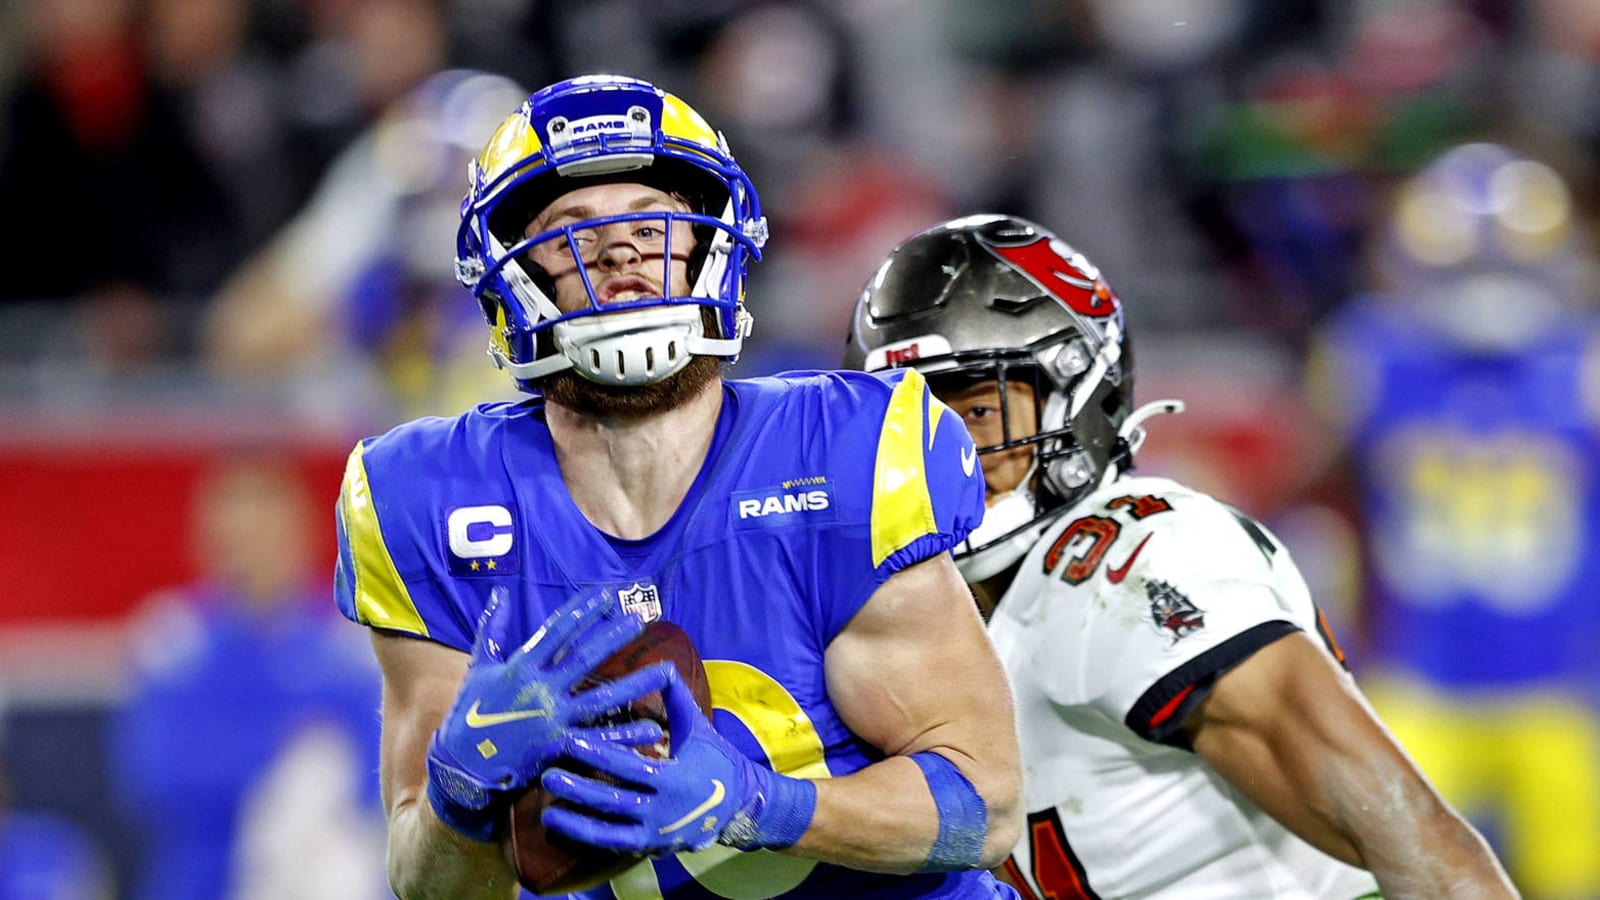 Rams WR Cooper Kupp redeems himself in huge way after costly fumble